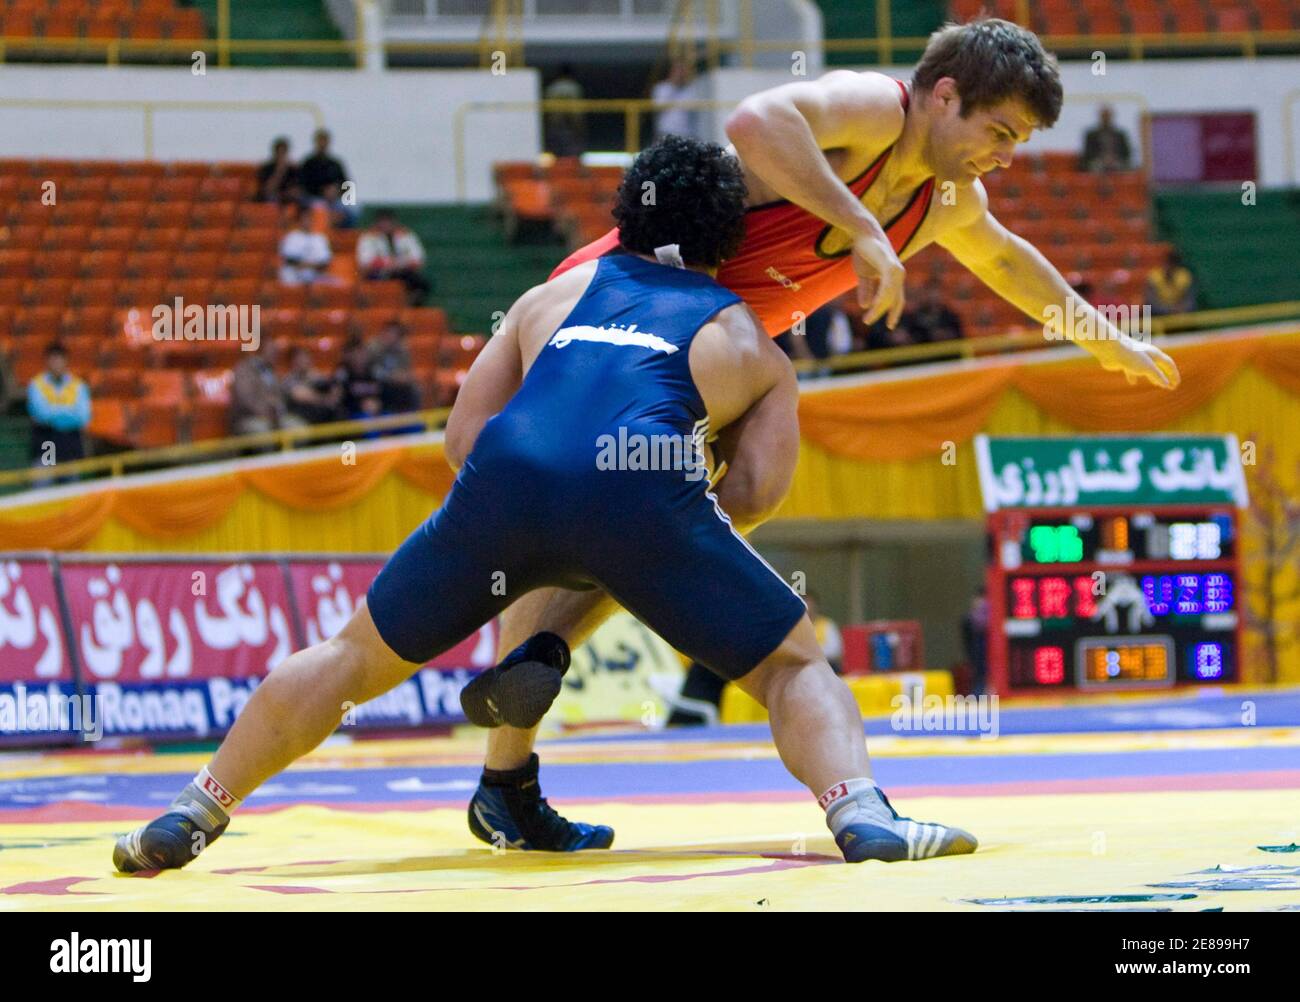 Michael Tamillow (in red) of the U.S. wrestles Rasoul Tavakoli of Iran in the 96kg weight class of the 29th Takhti Freestyle Wrestling Tournament in Tehran March 12, 2009. REUTERS/Raheb Homavandi (IRAN SPORT WRESTLING) Stock Photo